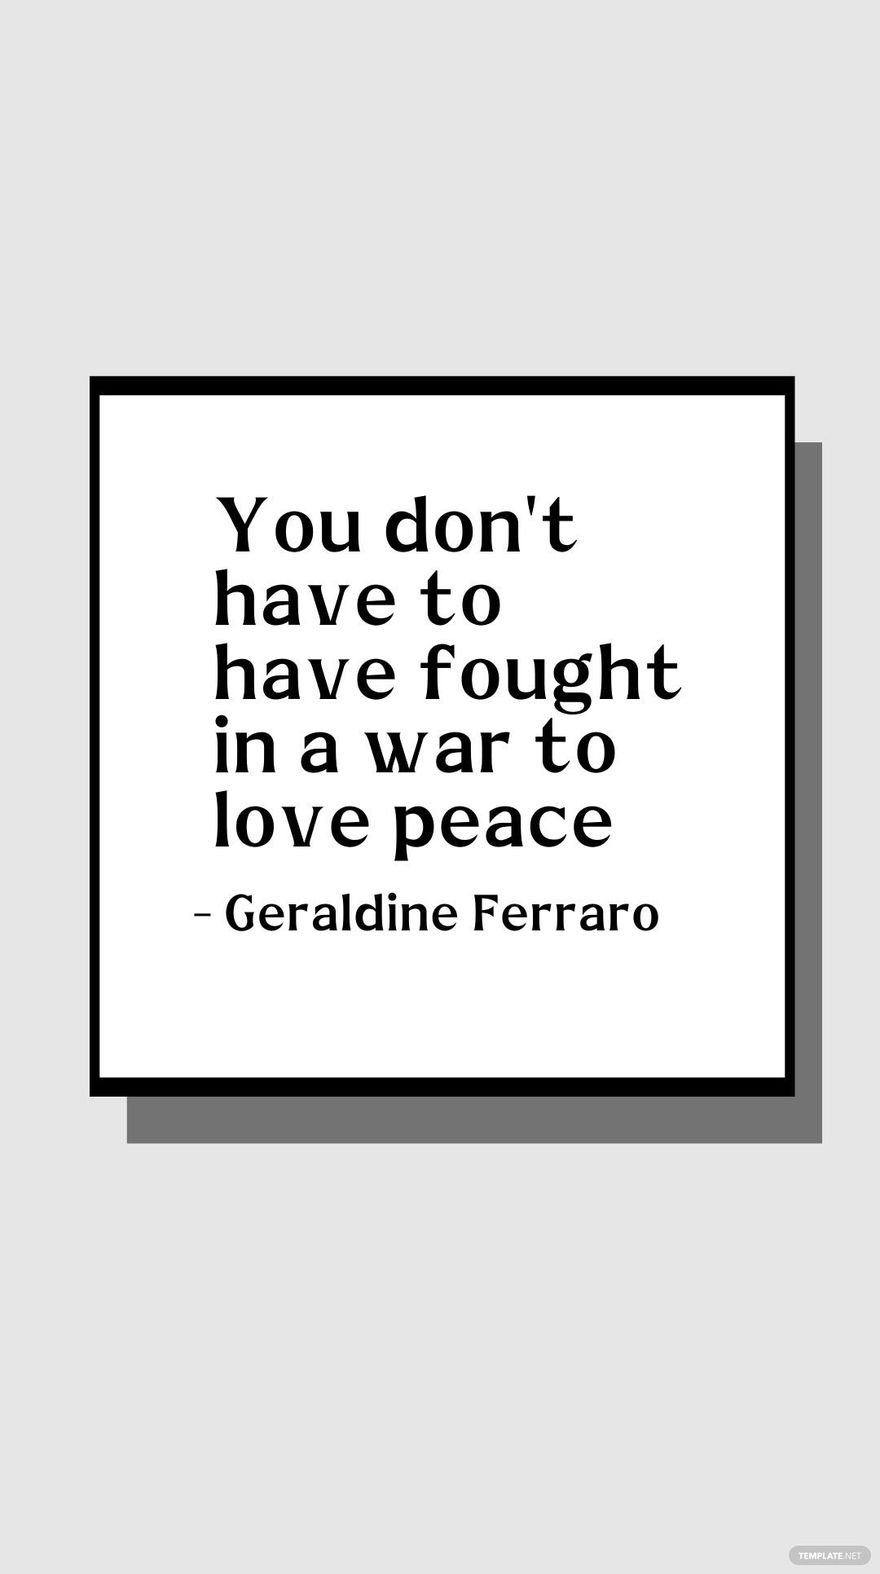 Geraldine Ferraro - You don't have to have fought in a war to love peace in JPG